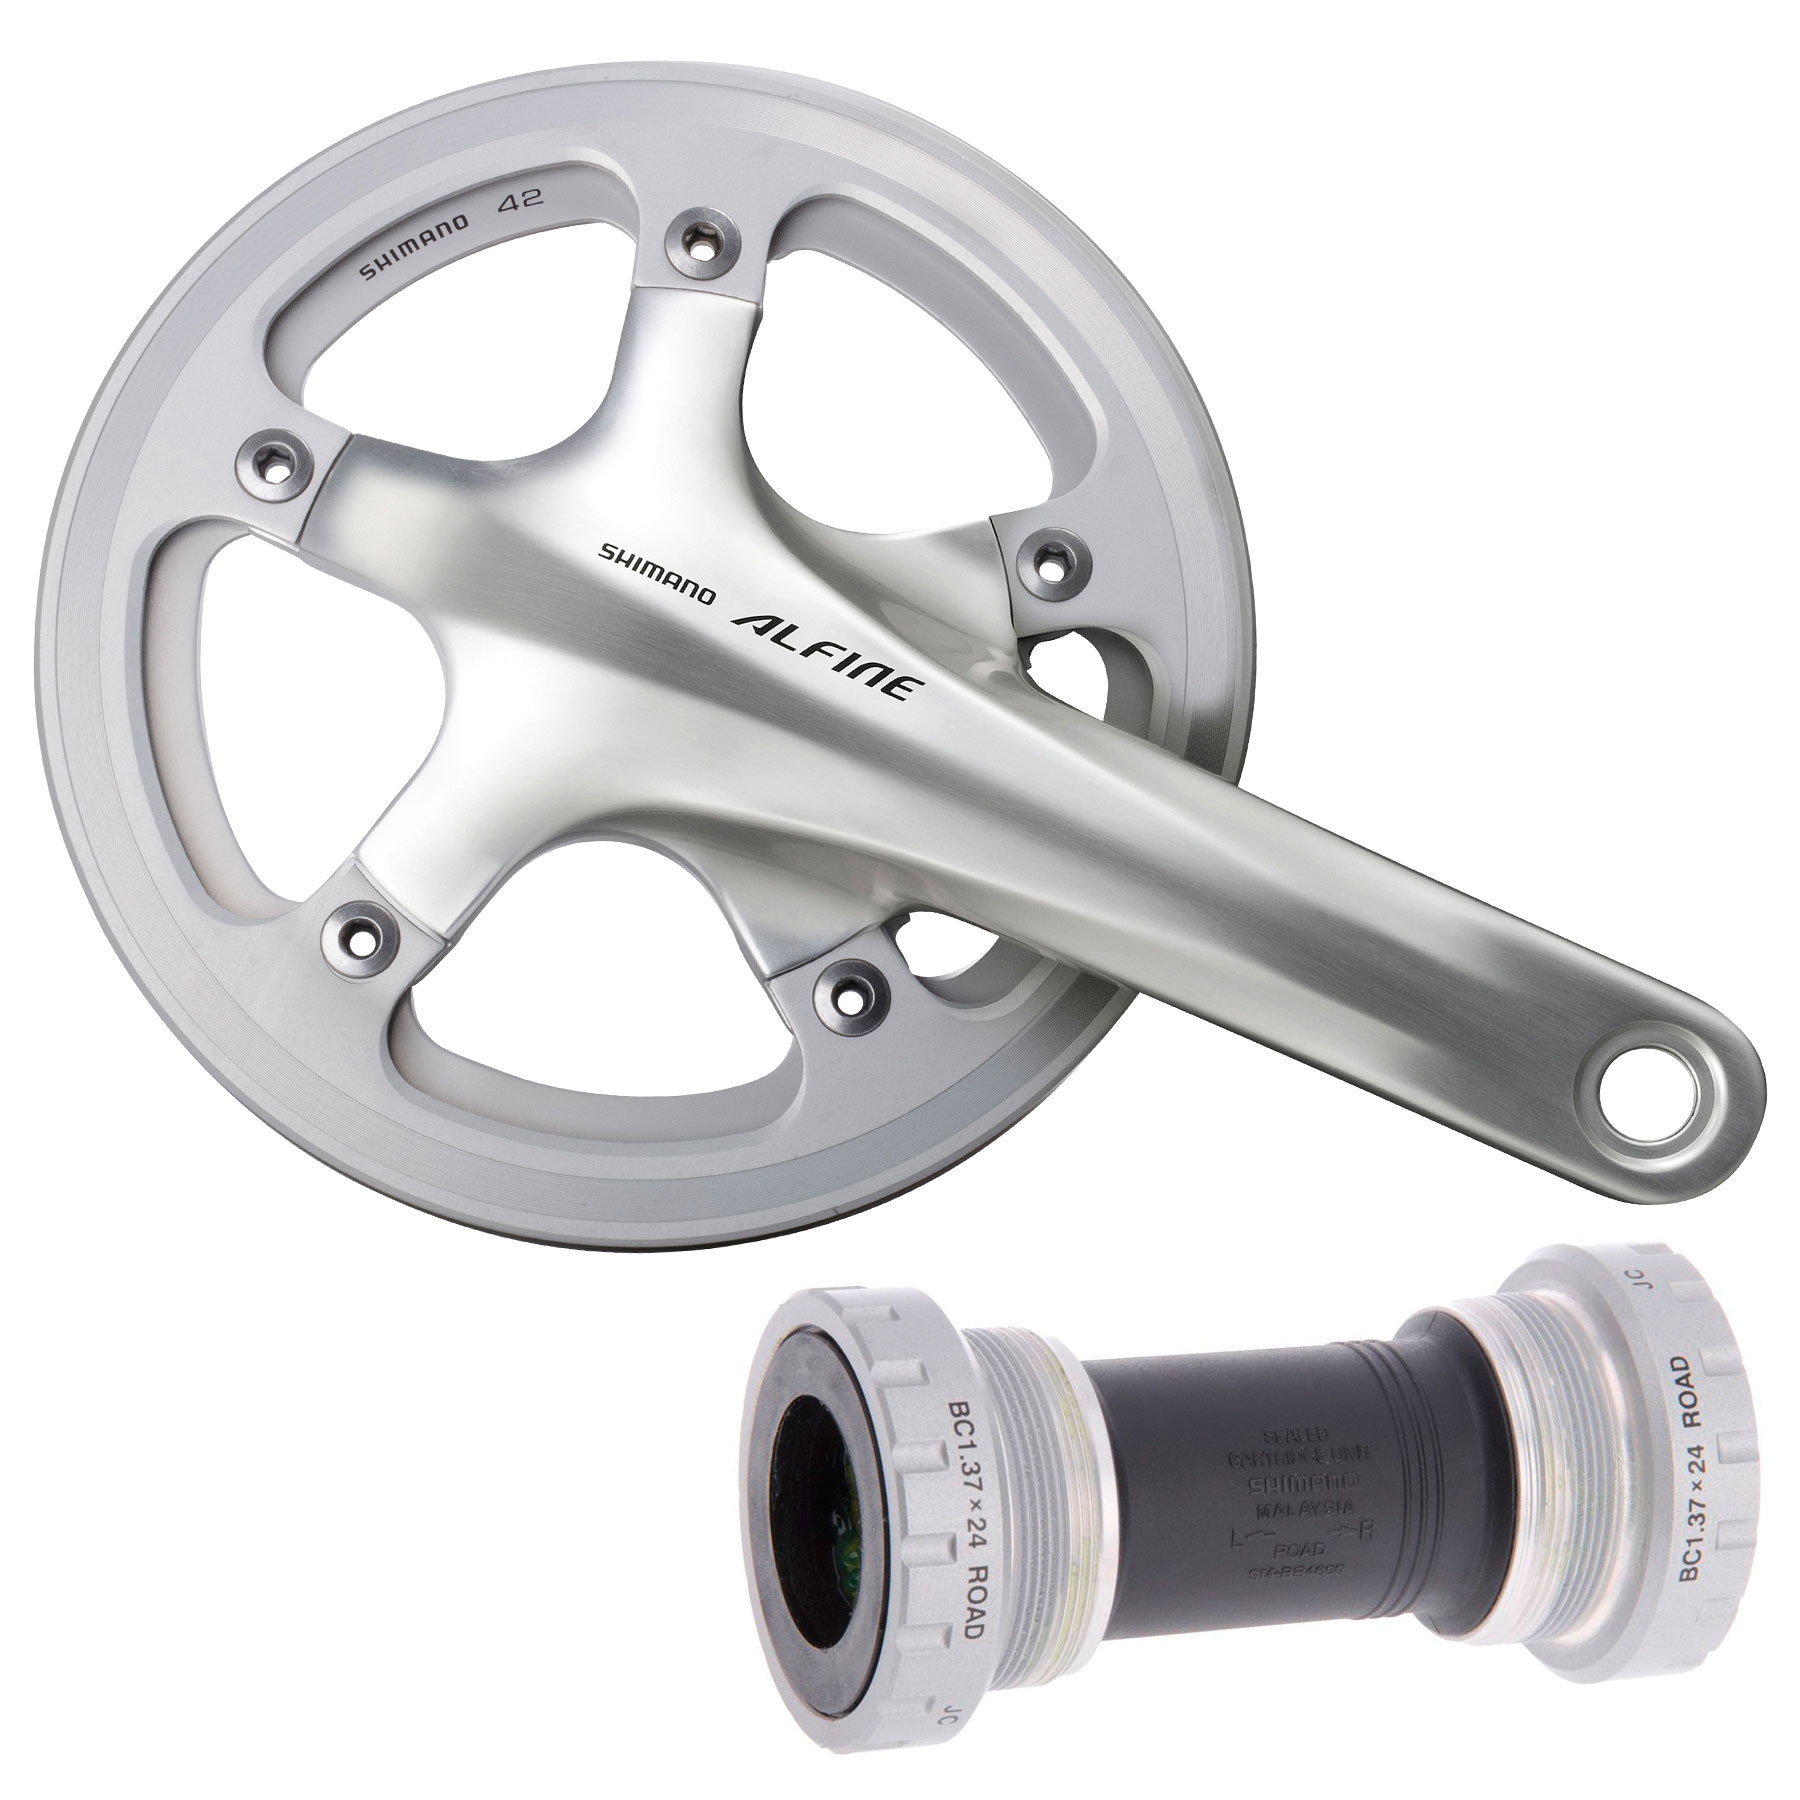 Image of Shimano Alfine FC-S501 Crankset with SM-BB4600 Bottom Bracket - Outer + Inner Chain Guard - silver